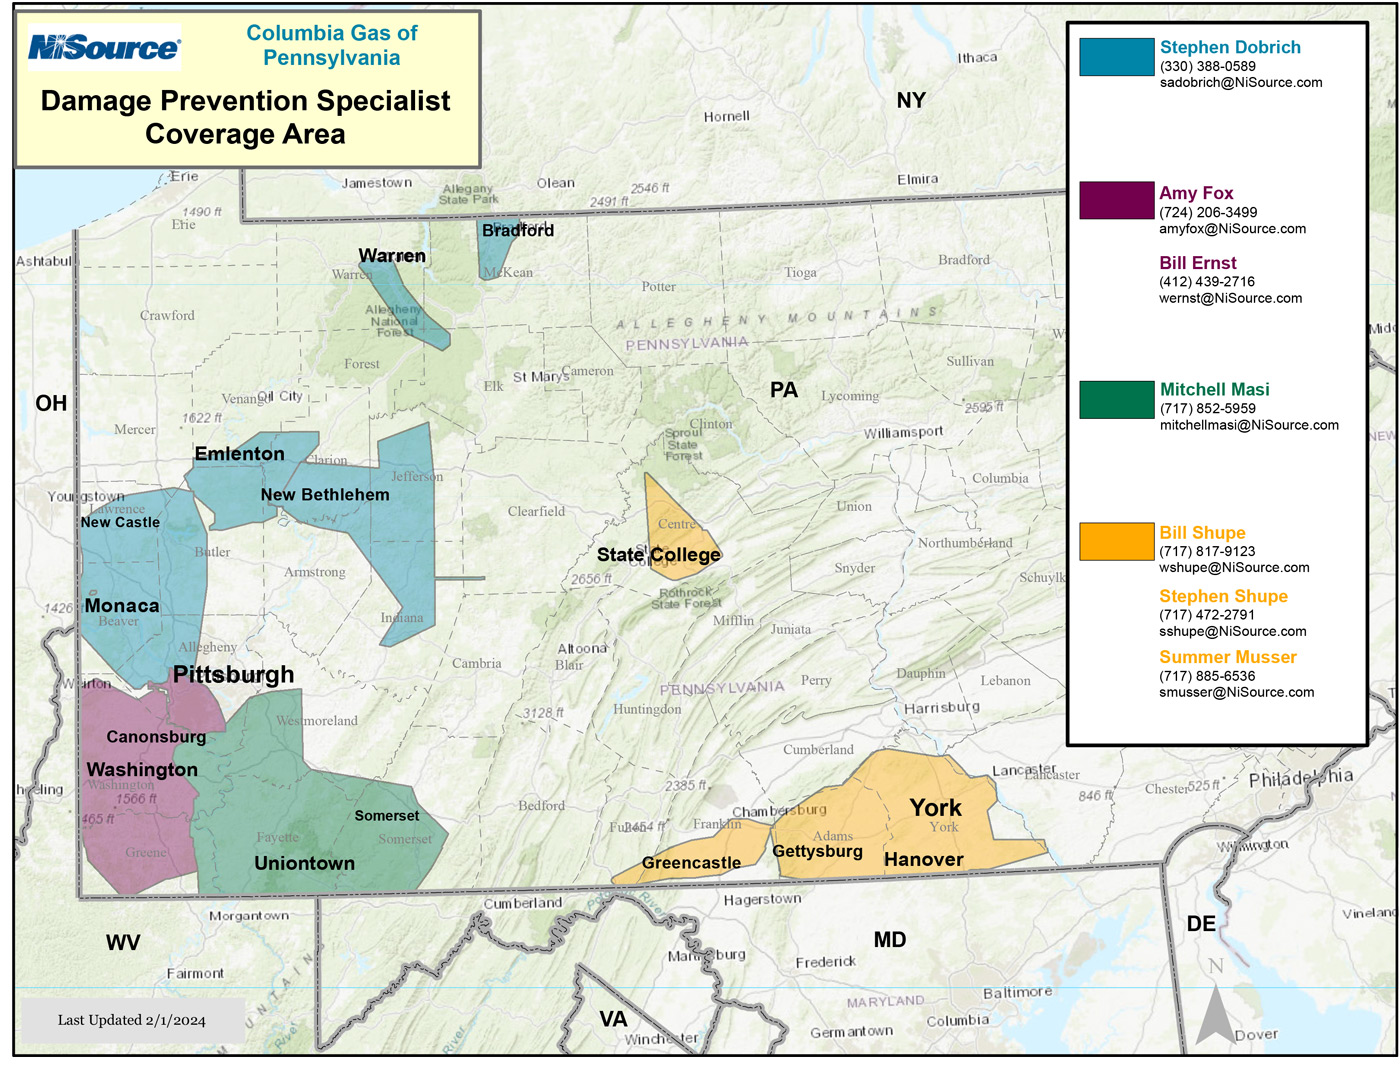 Columbia Gas of Pennsylvania Damage Prevention Specialist Map